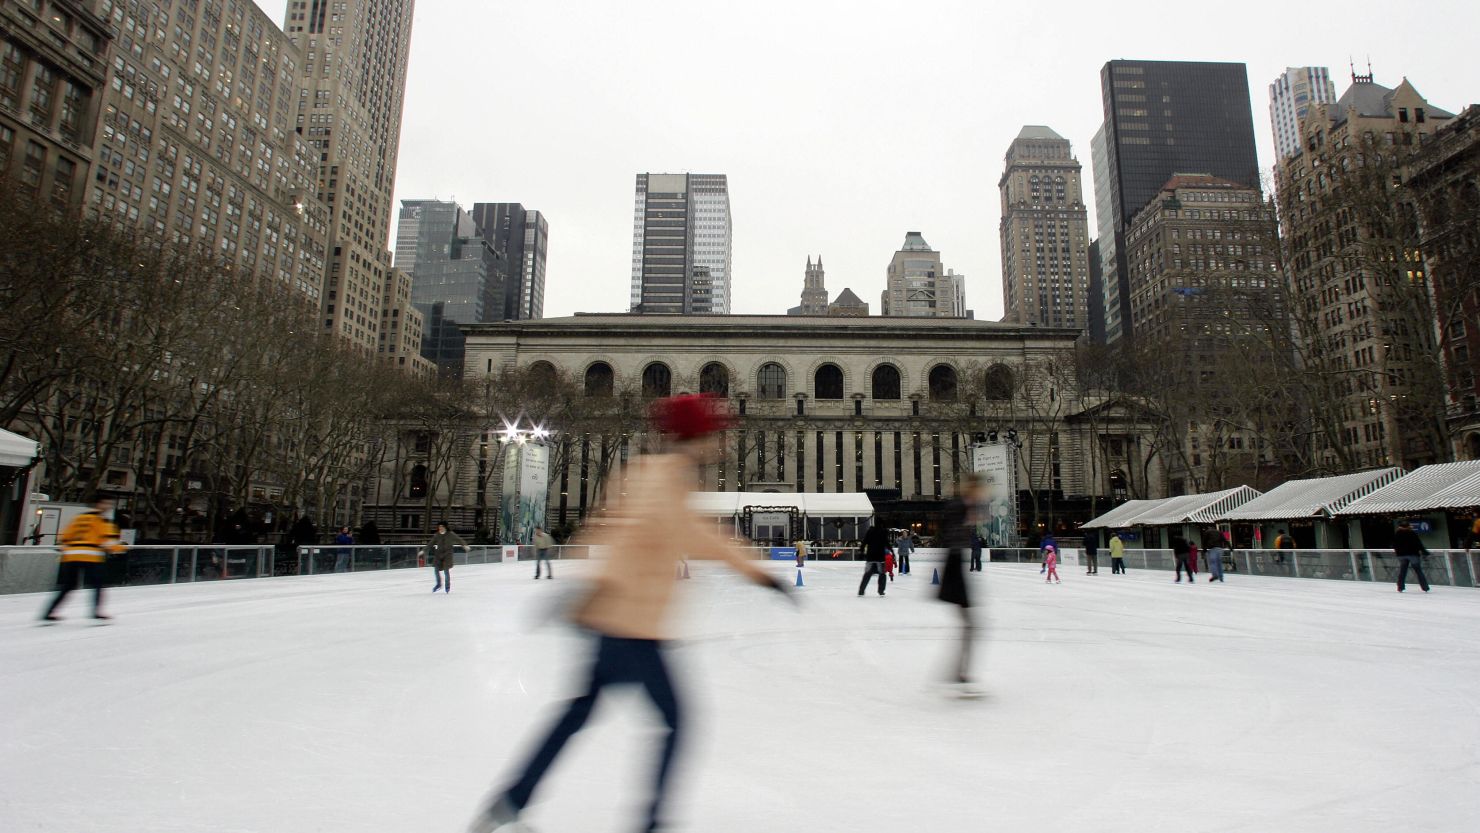  In this file image, a skater takes to the ice on the rink at Bryant Park. A shooting at the rink on Saturday left two people injured.